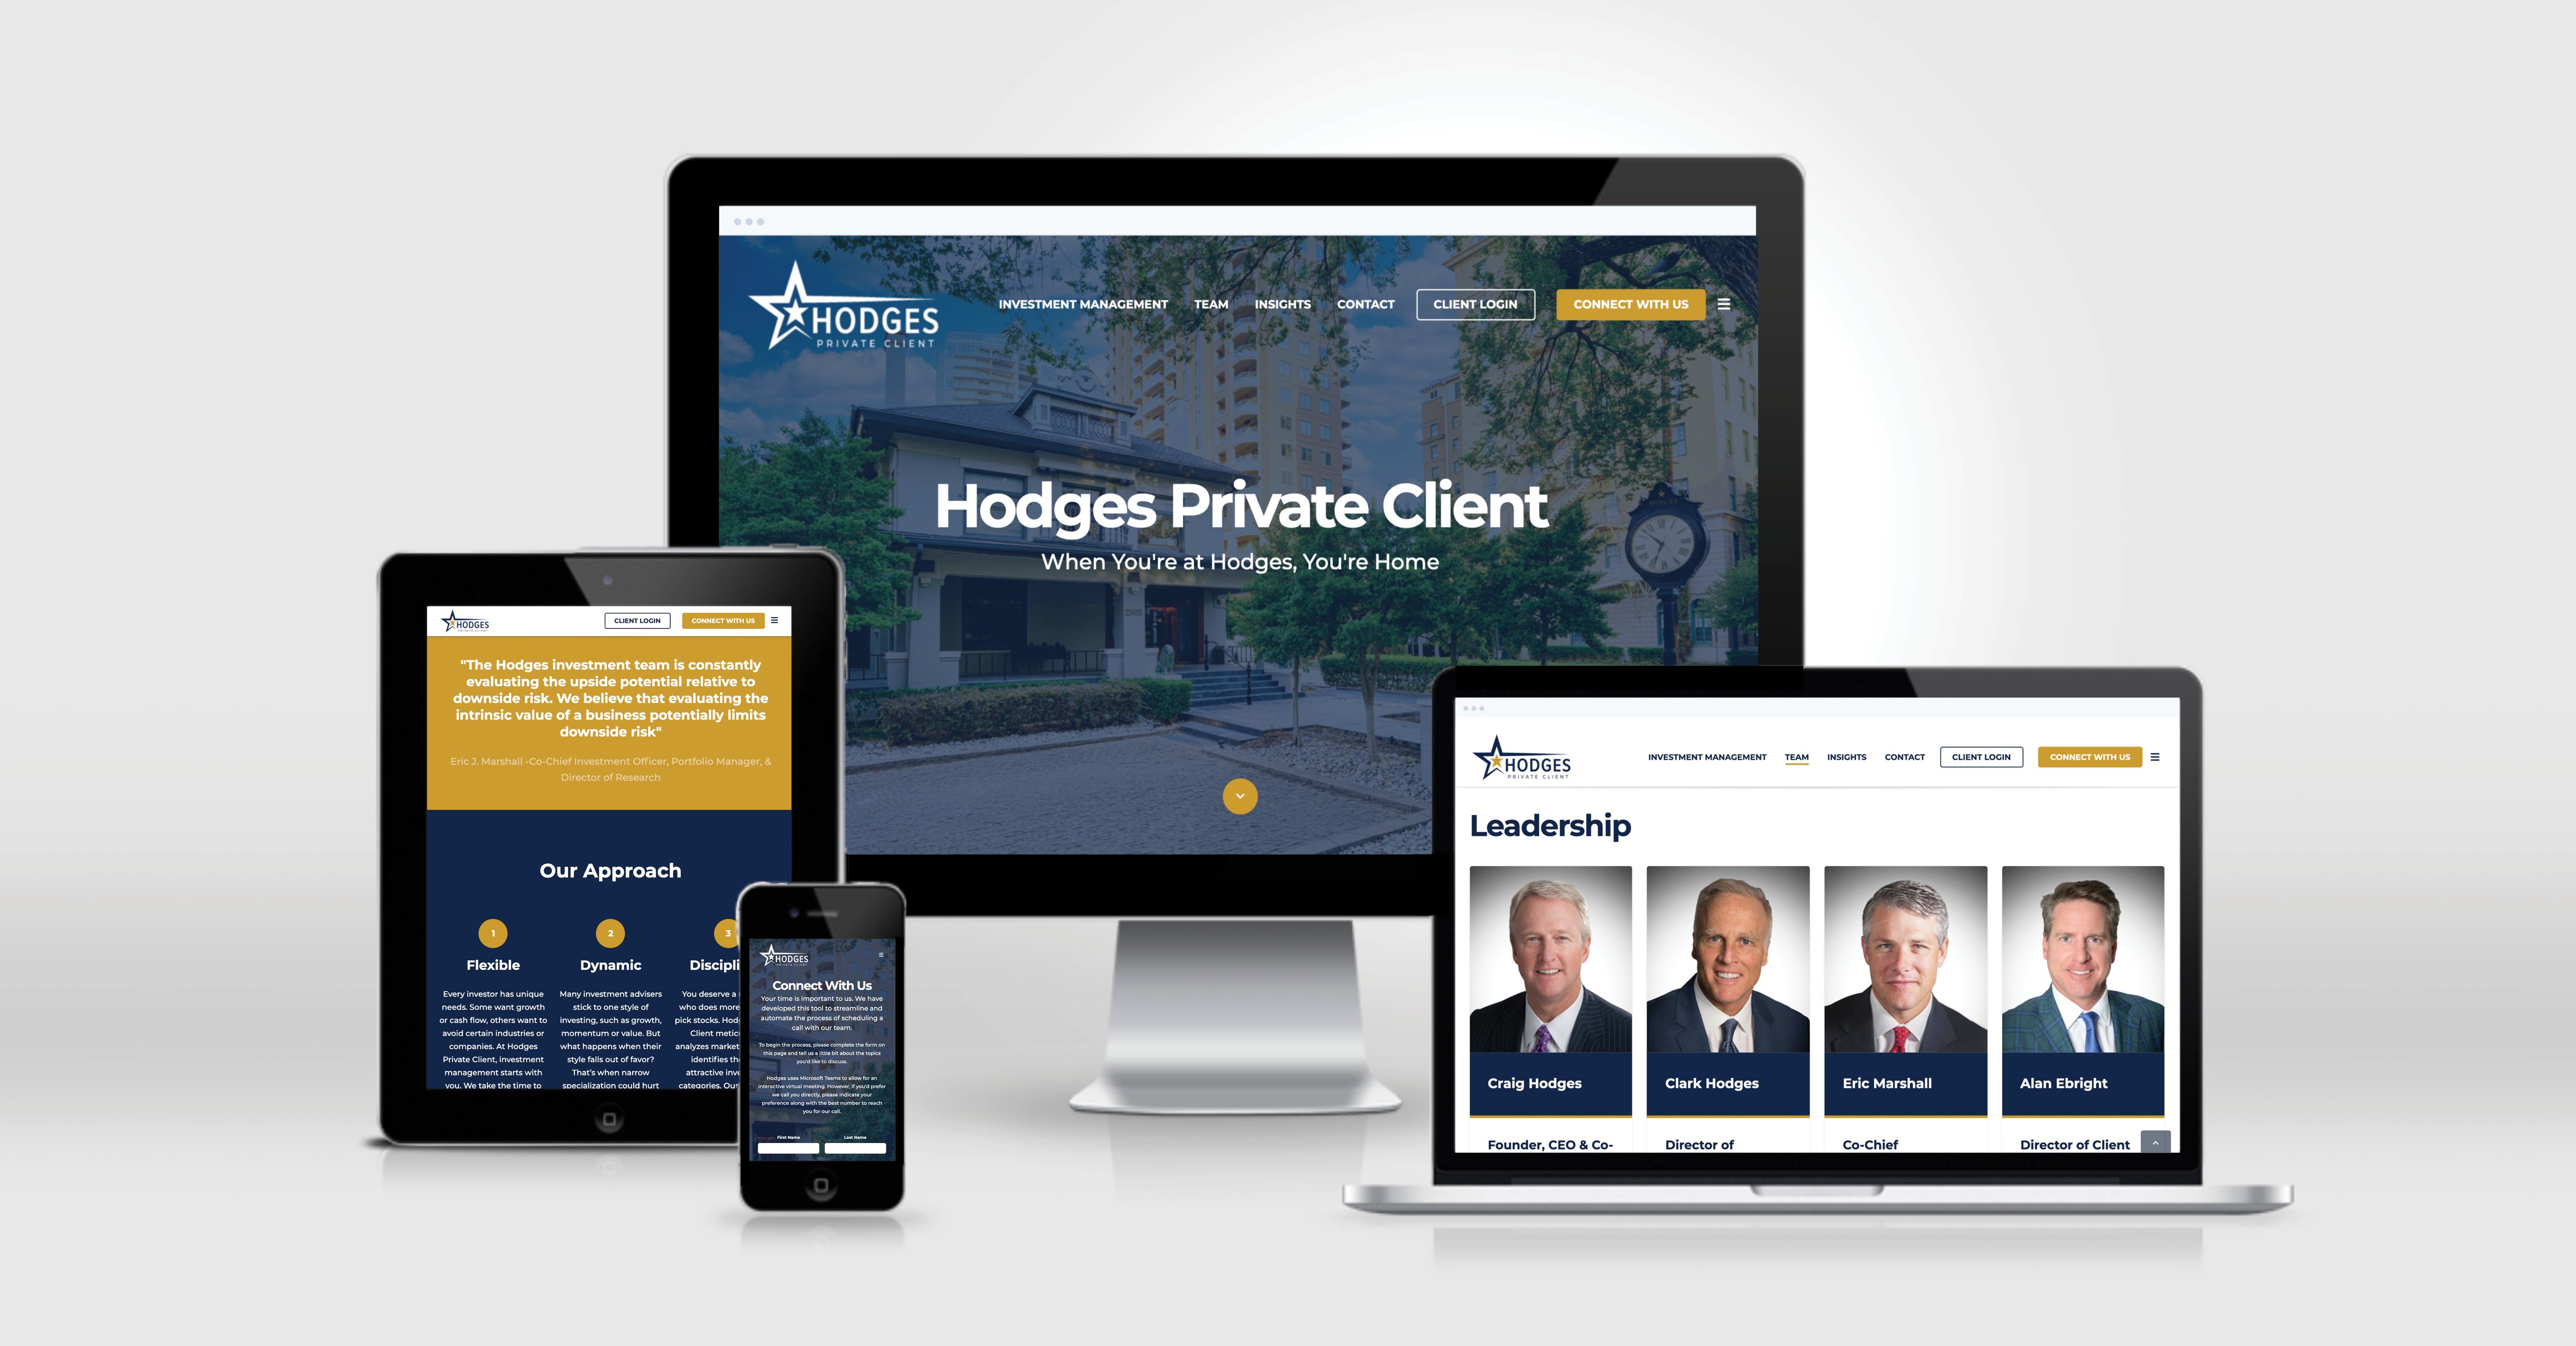 Announcing the Hodges Private Client New Web Site!